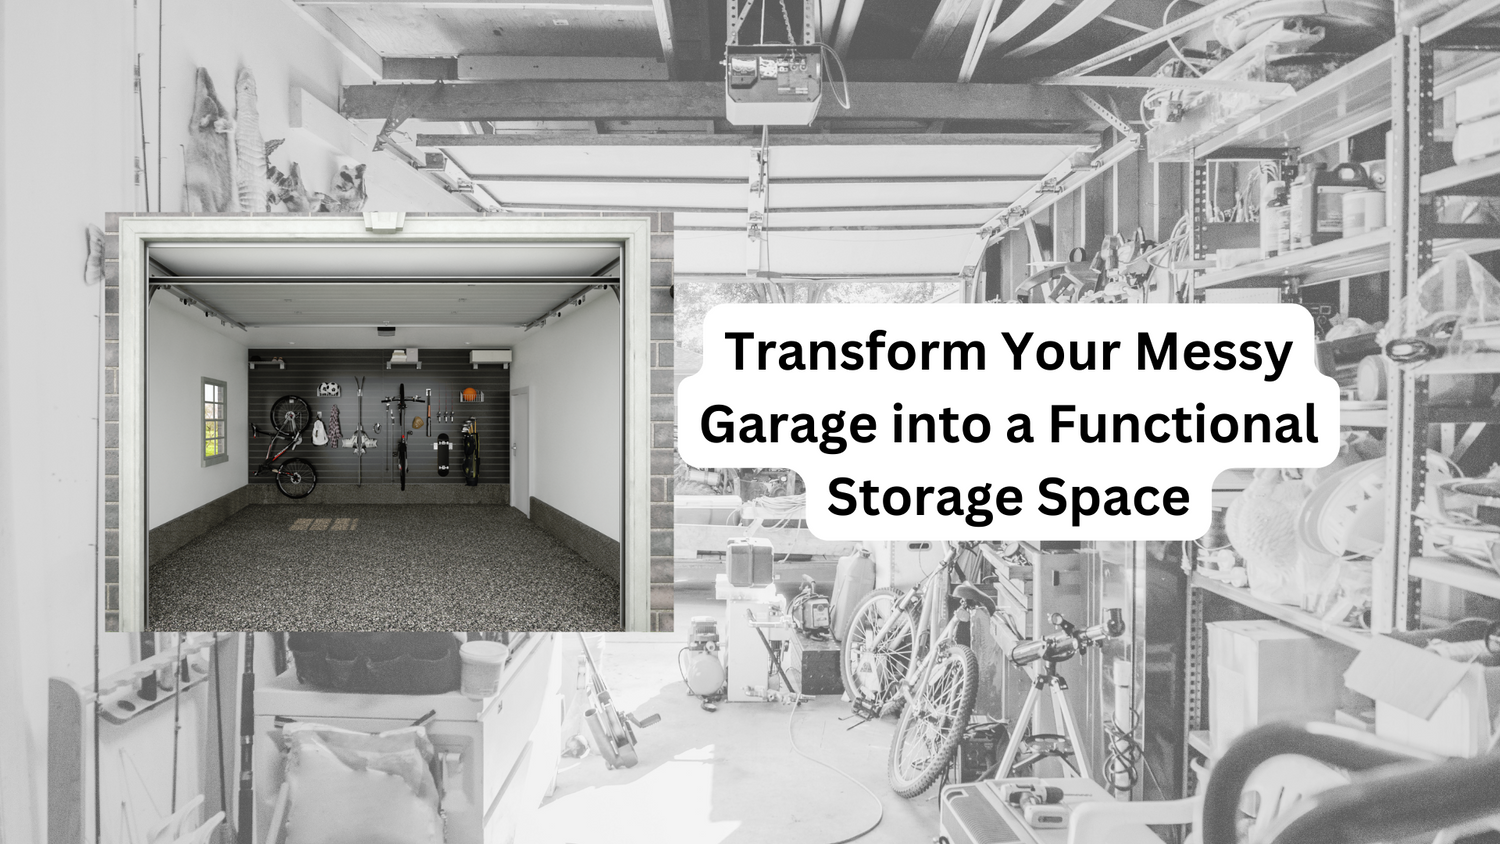 How to Transform Your Messy Garage into a Functional Storage Space